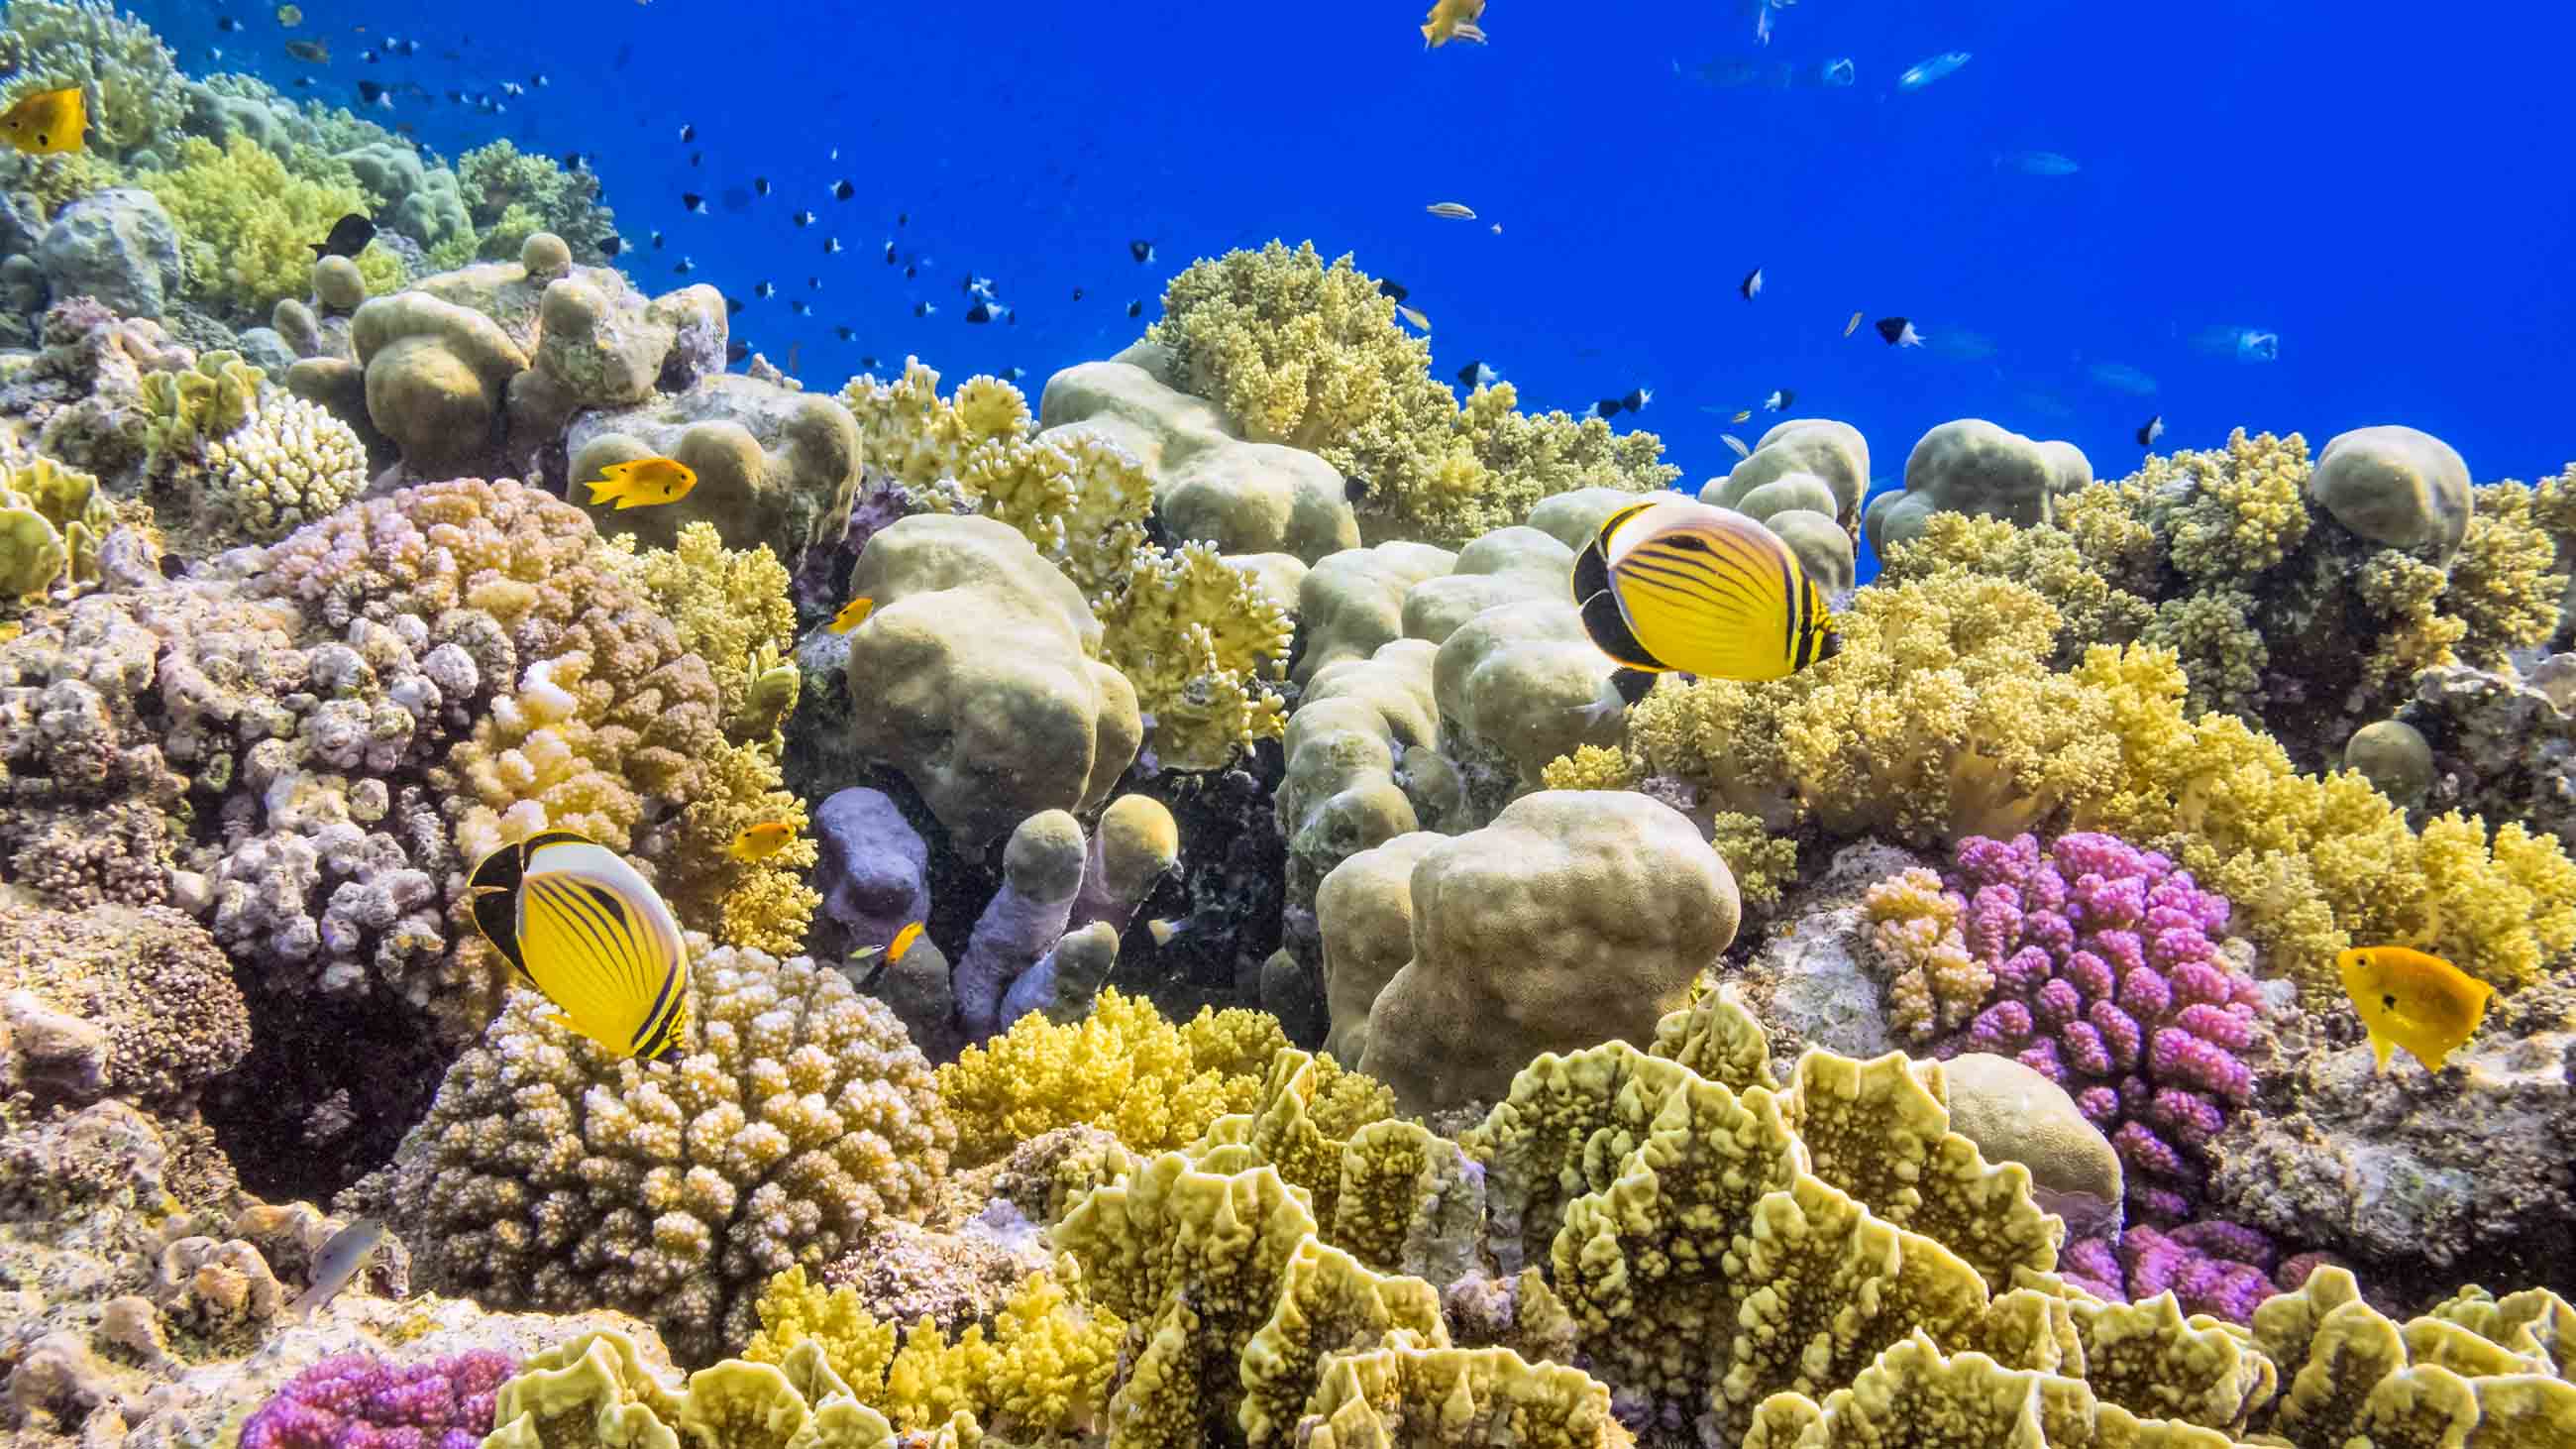 High Schoolers Have High Hopes for Saving Corals